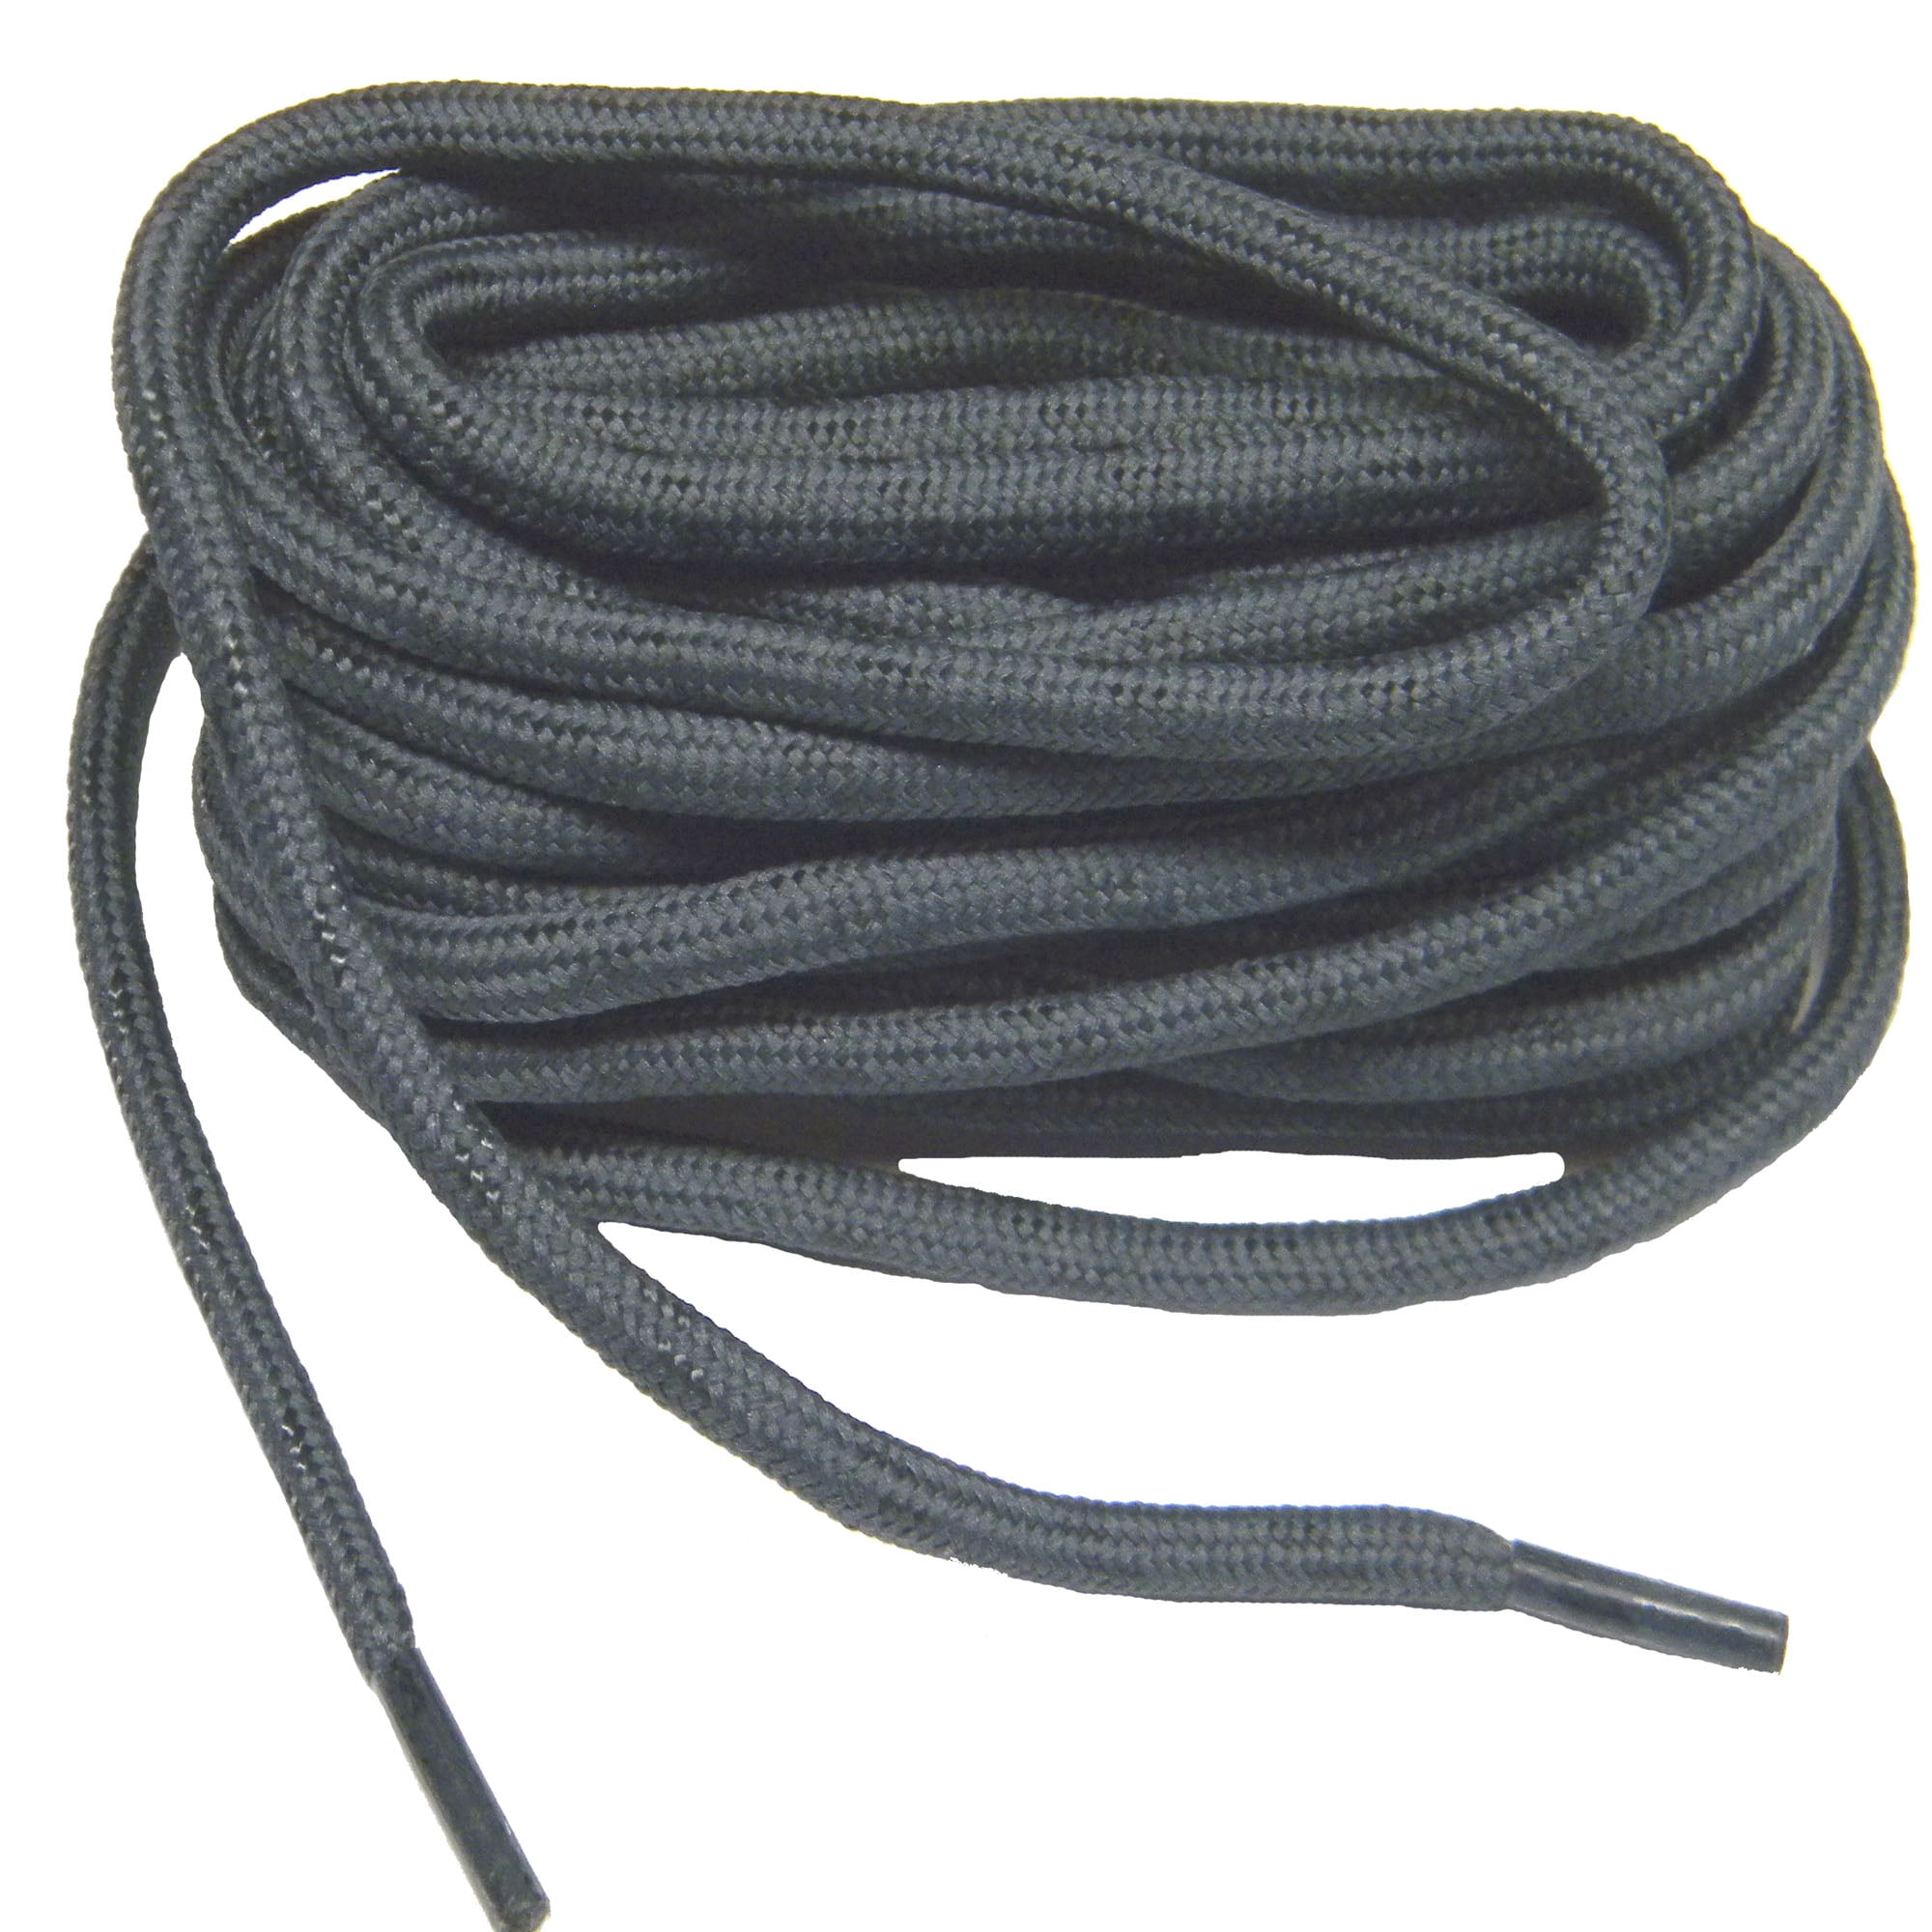 Heavy Duty Tan Shoe Boot Laces made with Black Dupont™ Kevlar® 